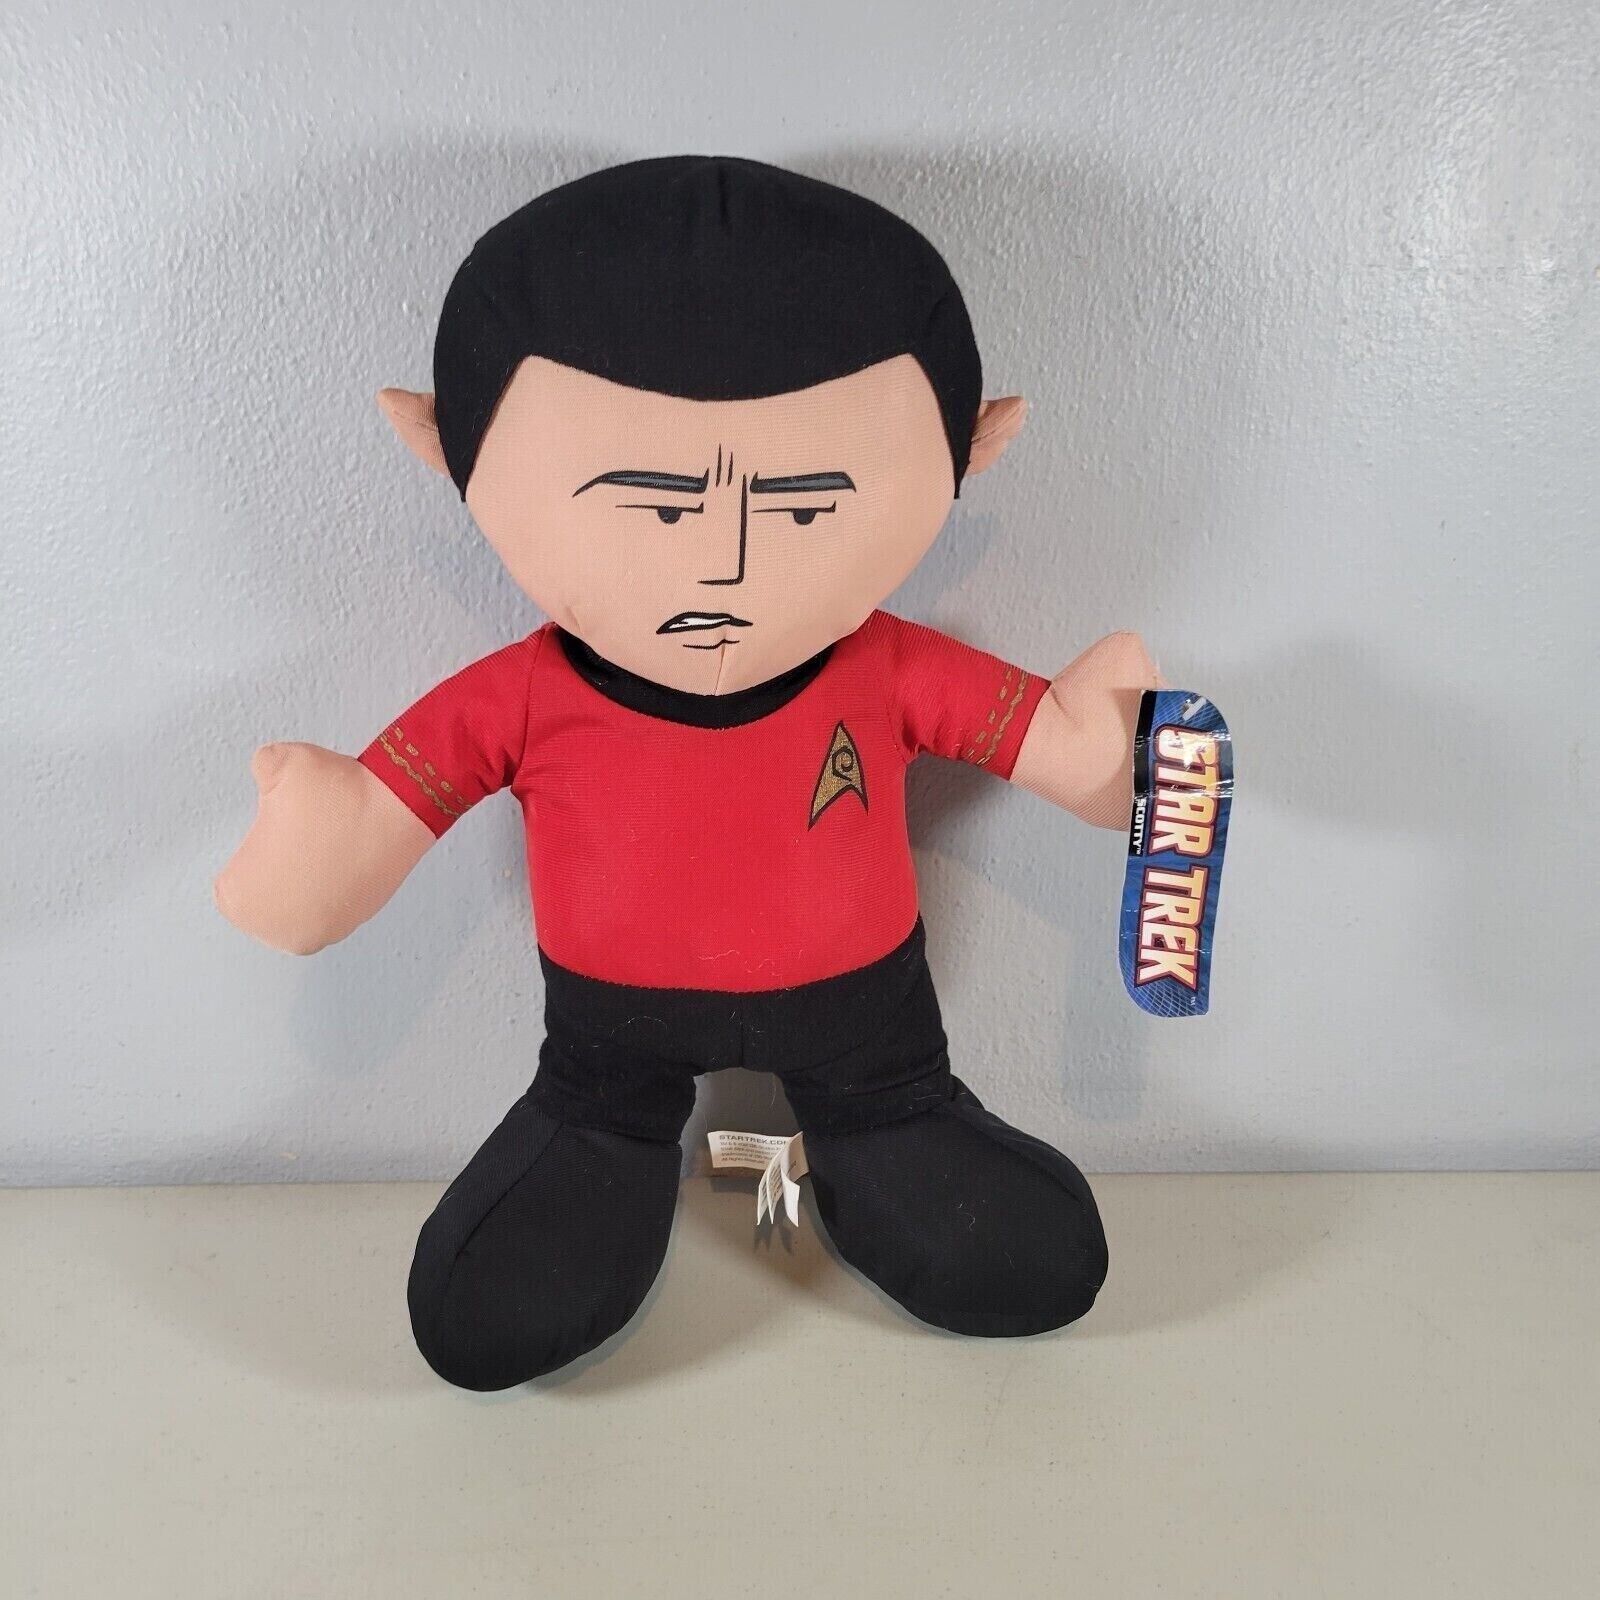 Star Trek Plush Scotty Doll Toy Factory 14.5" Tall With Tags Toy Factory - $13.98